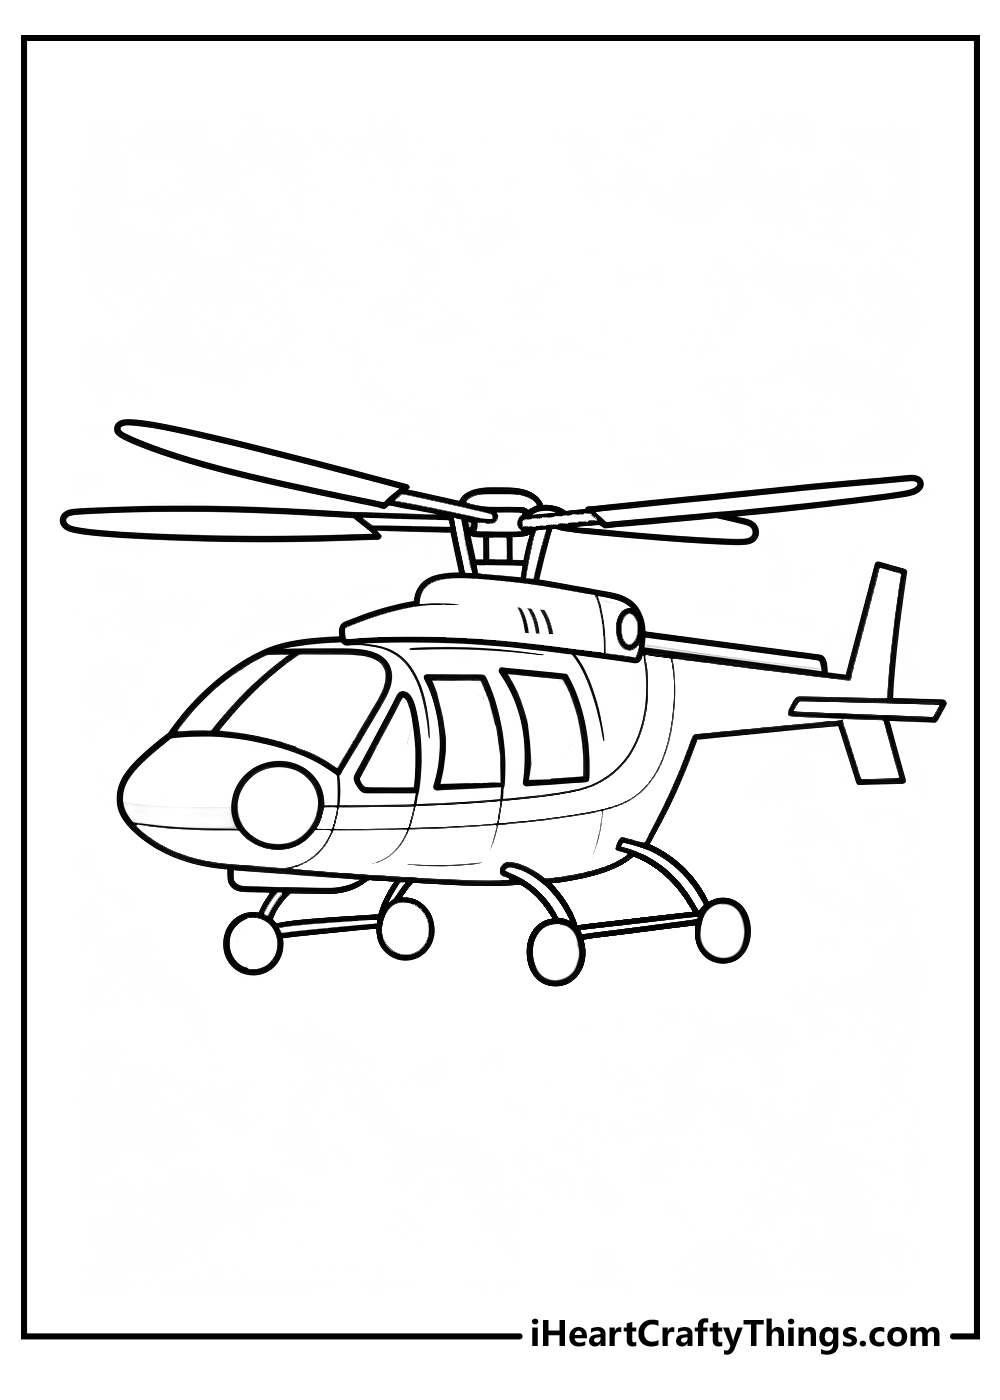 original helicopter coloring printable